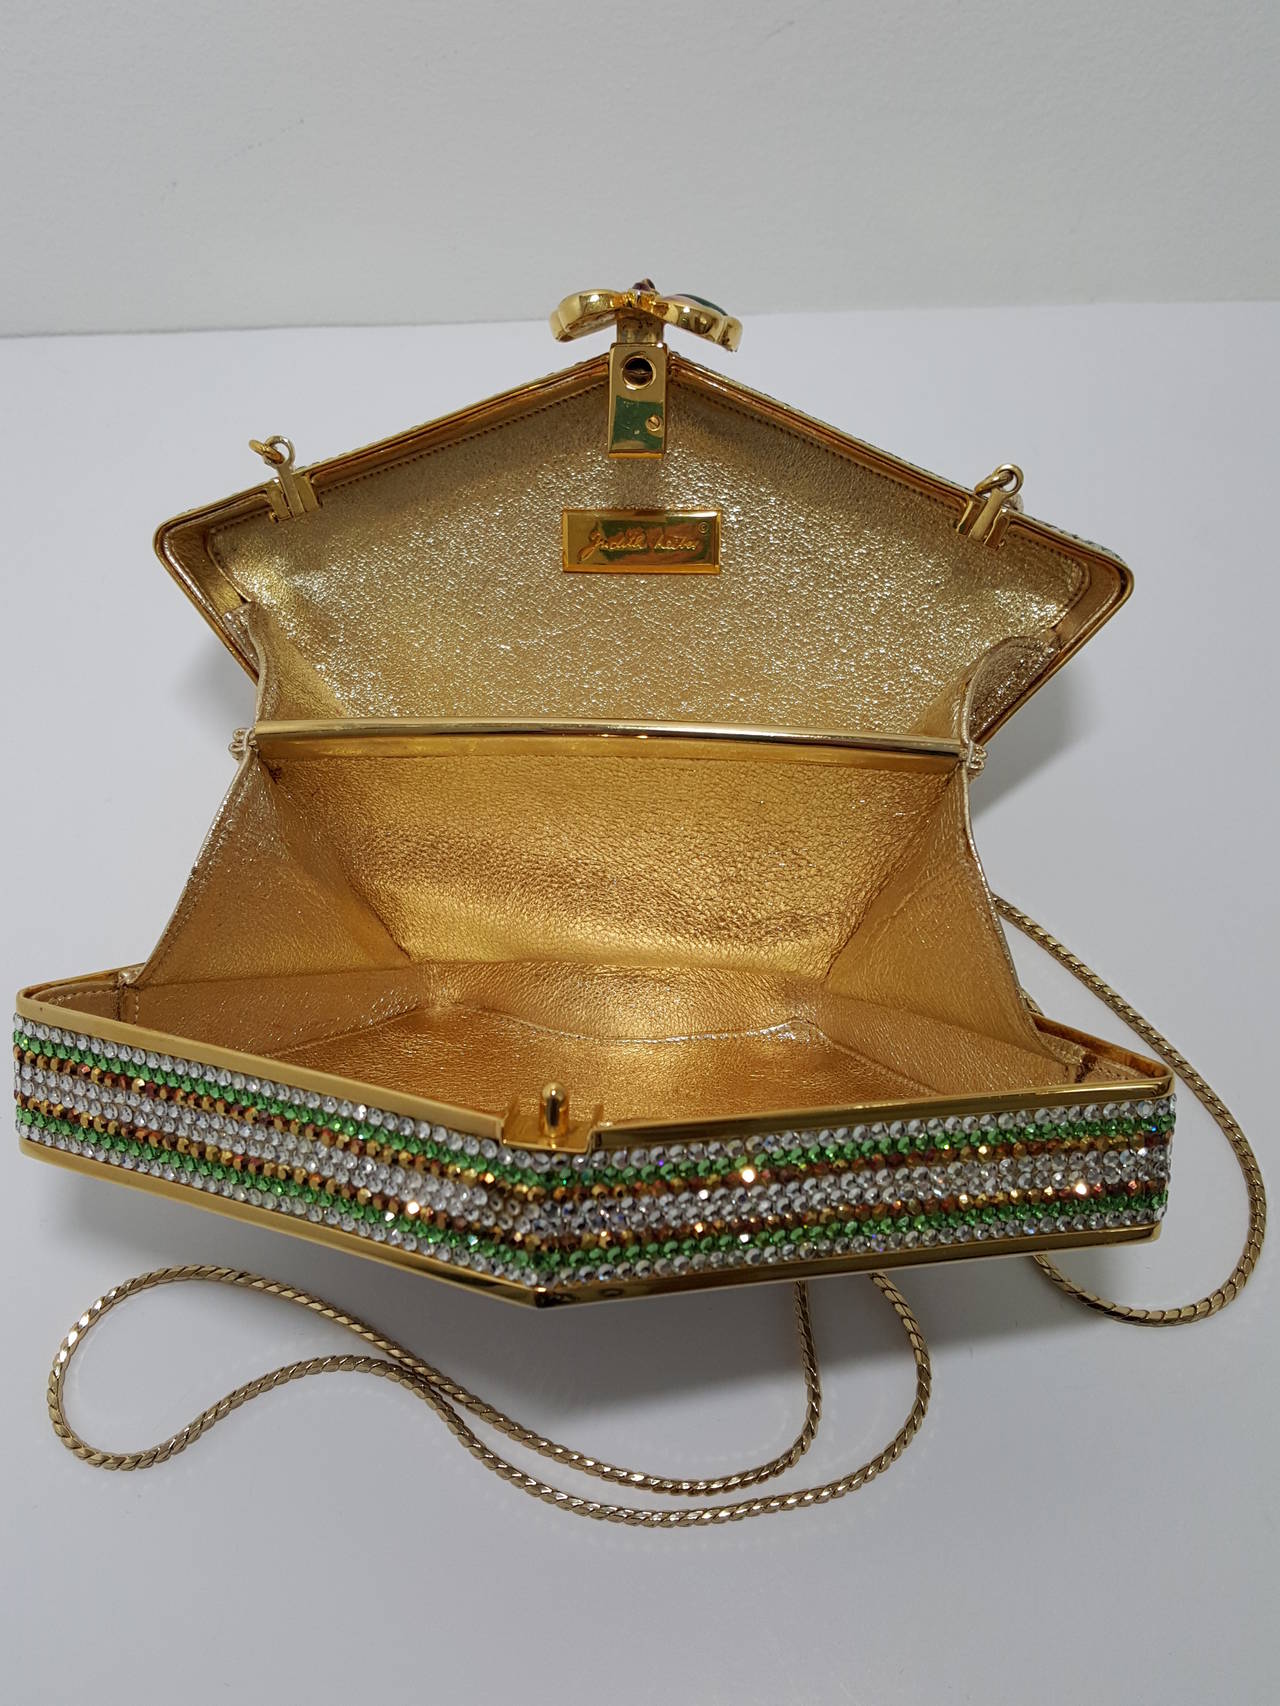 This beautiful Judith Leiber Swarovski crystal minaudiere with multi colored butterflies is a must for any collection.  It has the appearance of never been carried.  The gold tone chain can be stored inside the bag to carry as a clutch or extended